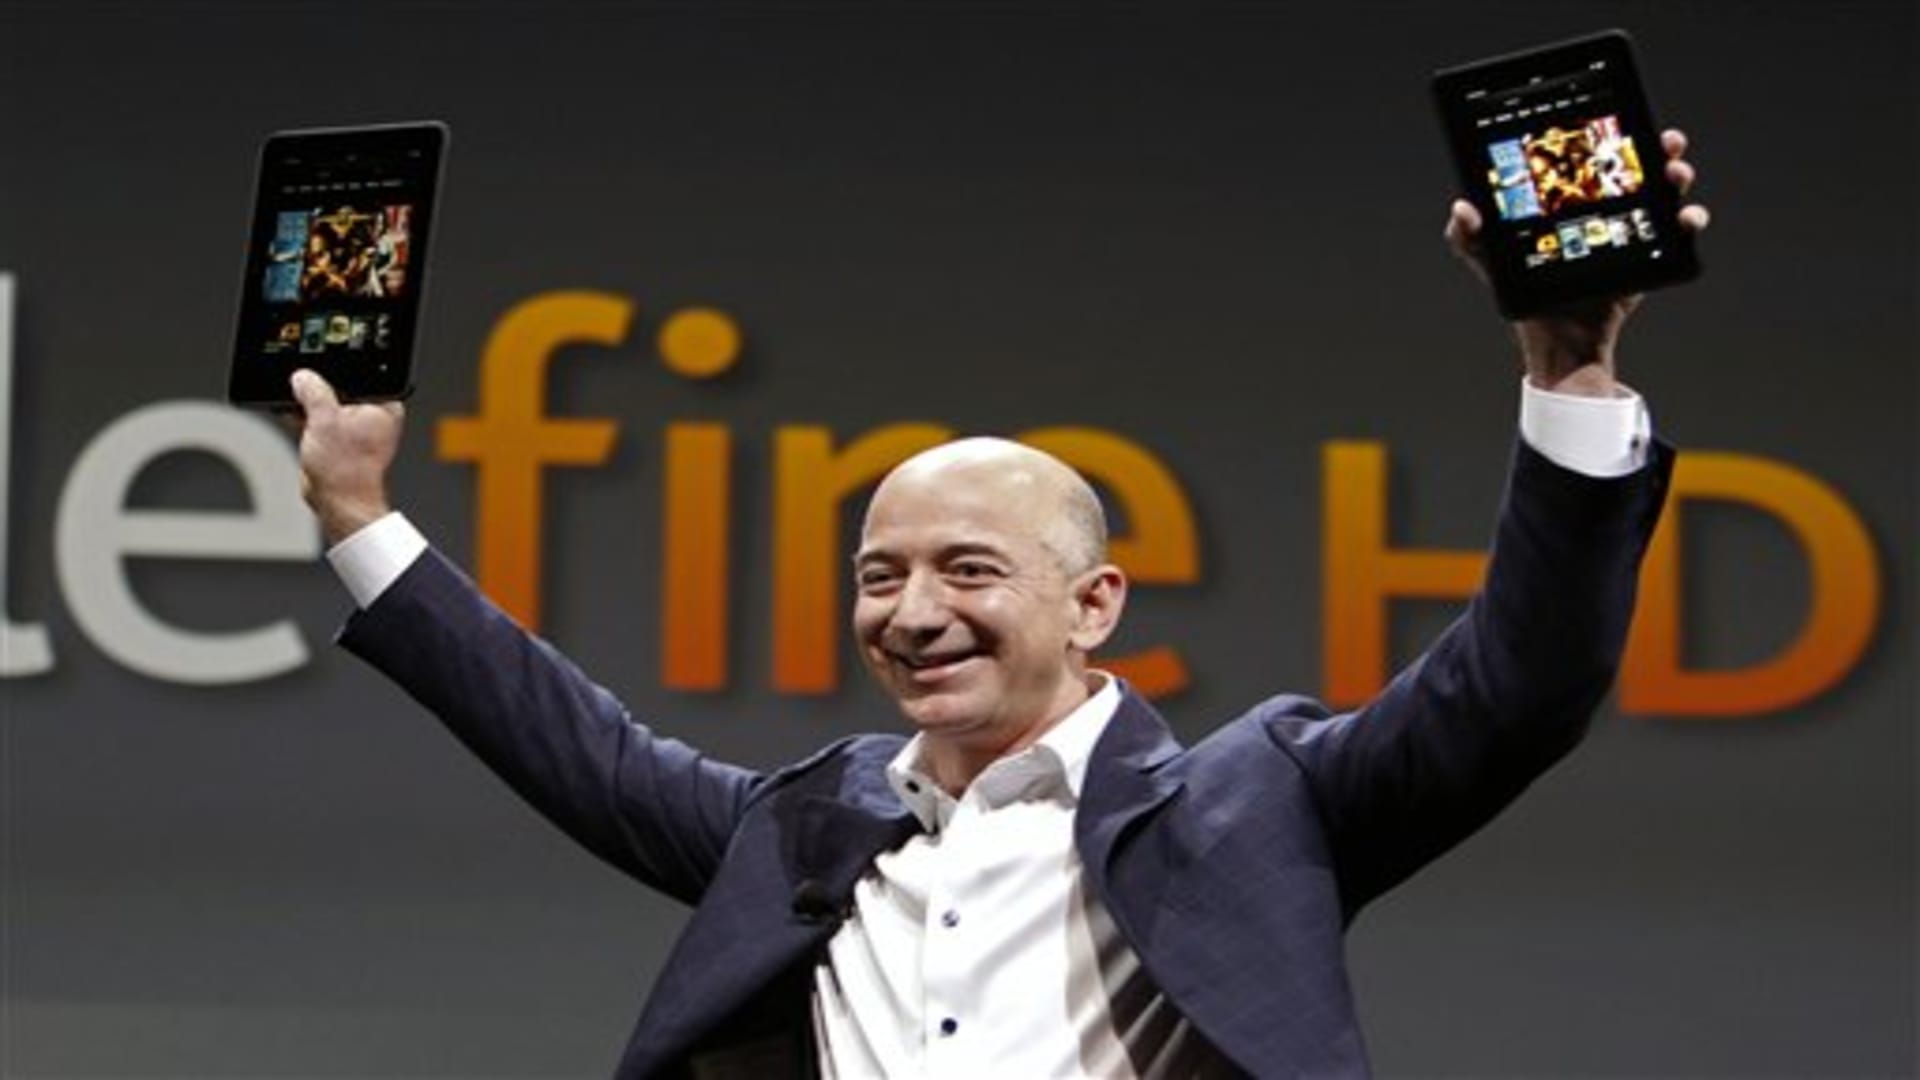 Jeff Bezos, CEO and founder of Amazon, holds the new Amazon Kindle Fire HD at the product's introduction in Santa Monica, Calif., Thursday, Sept. 6, 2012. (AP Photo/Reed Saxon)